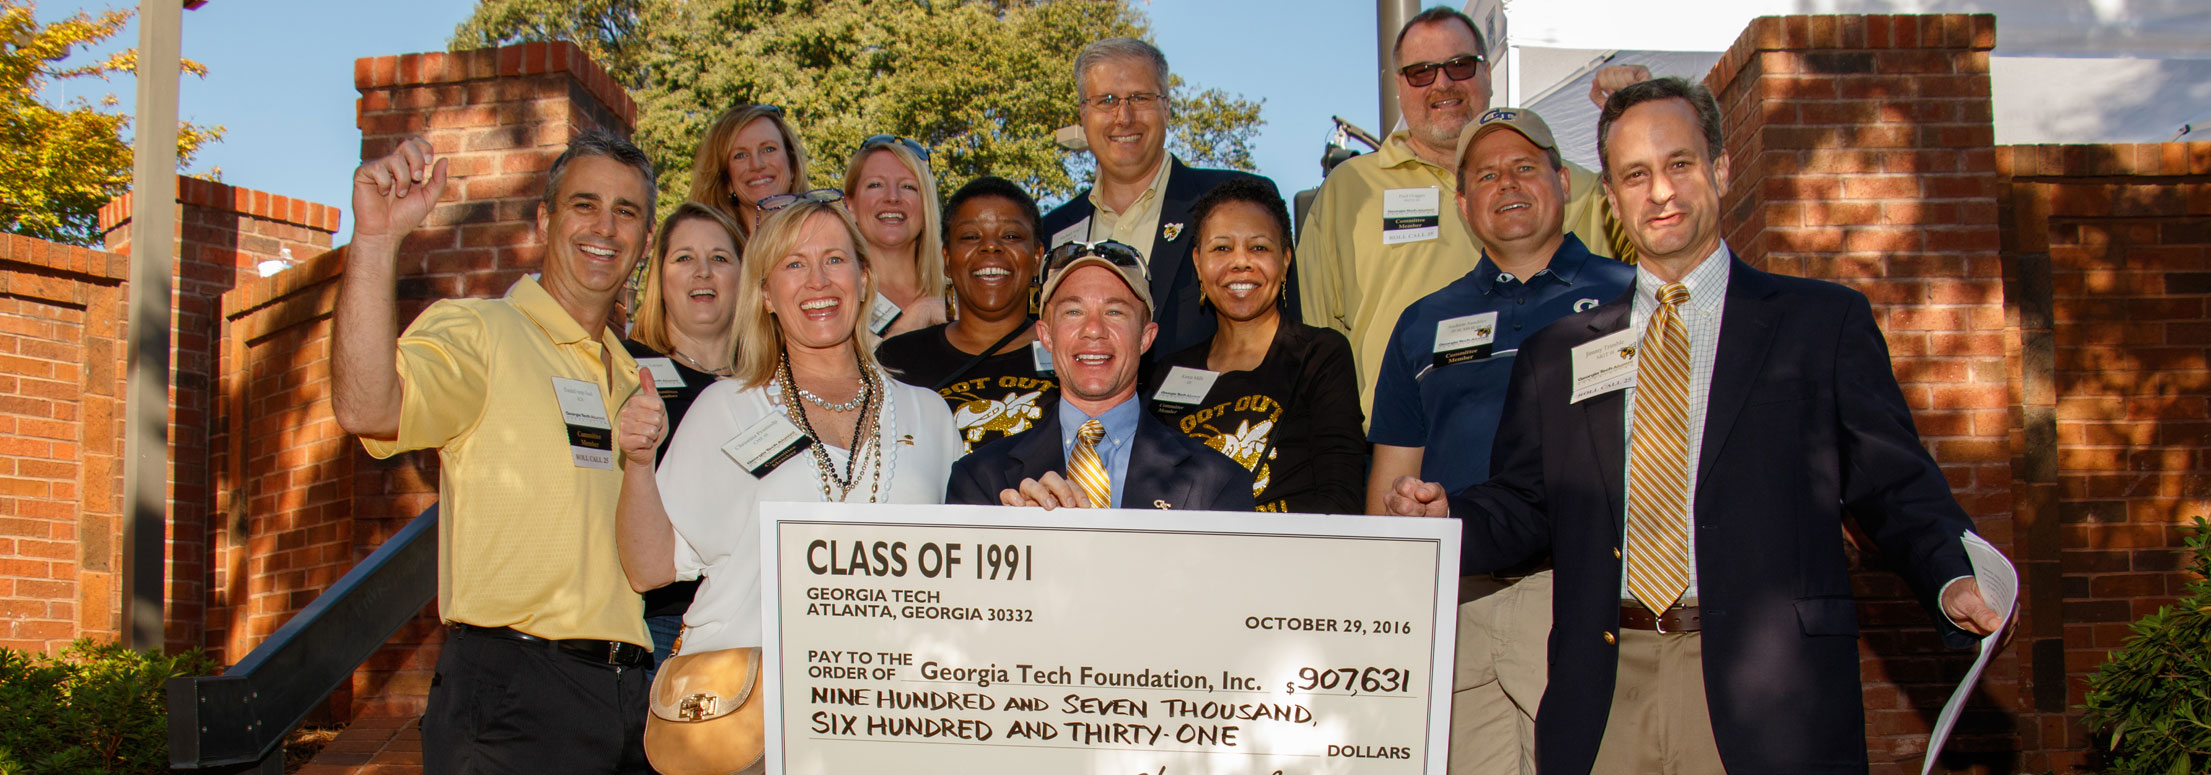 The class of 1991 at their 25th reunion holding up their reunion giving check